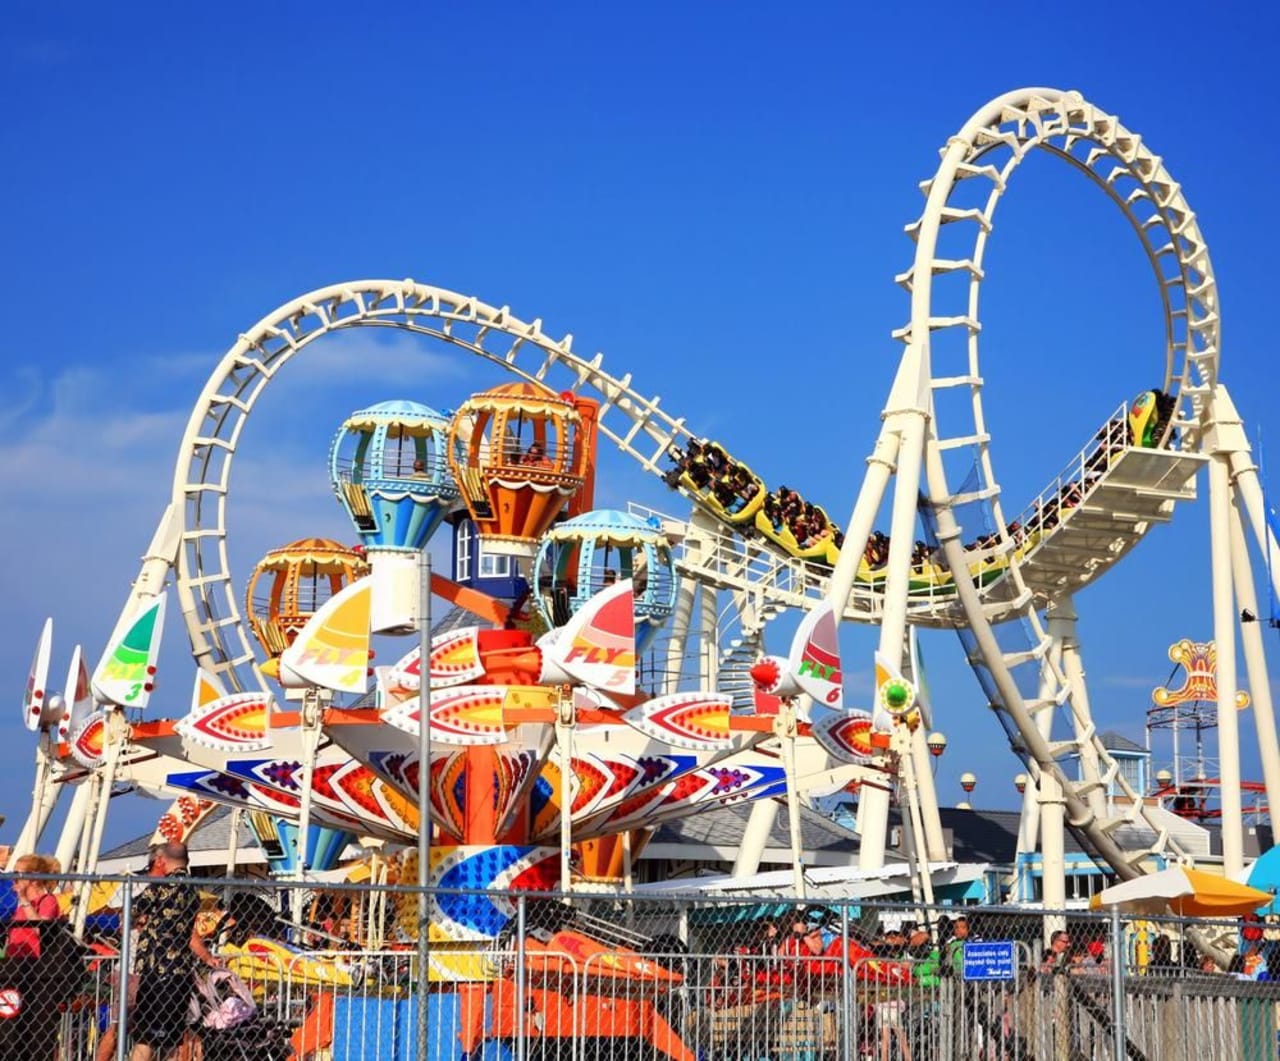 Contact Schools Directly - Compare multiple Online Programs in Amusement Park Management 2023/2024